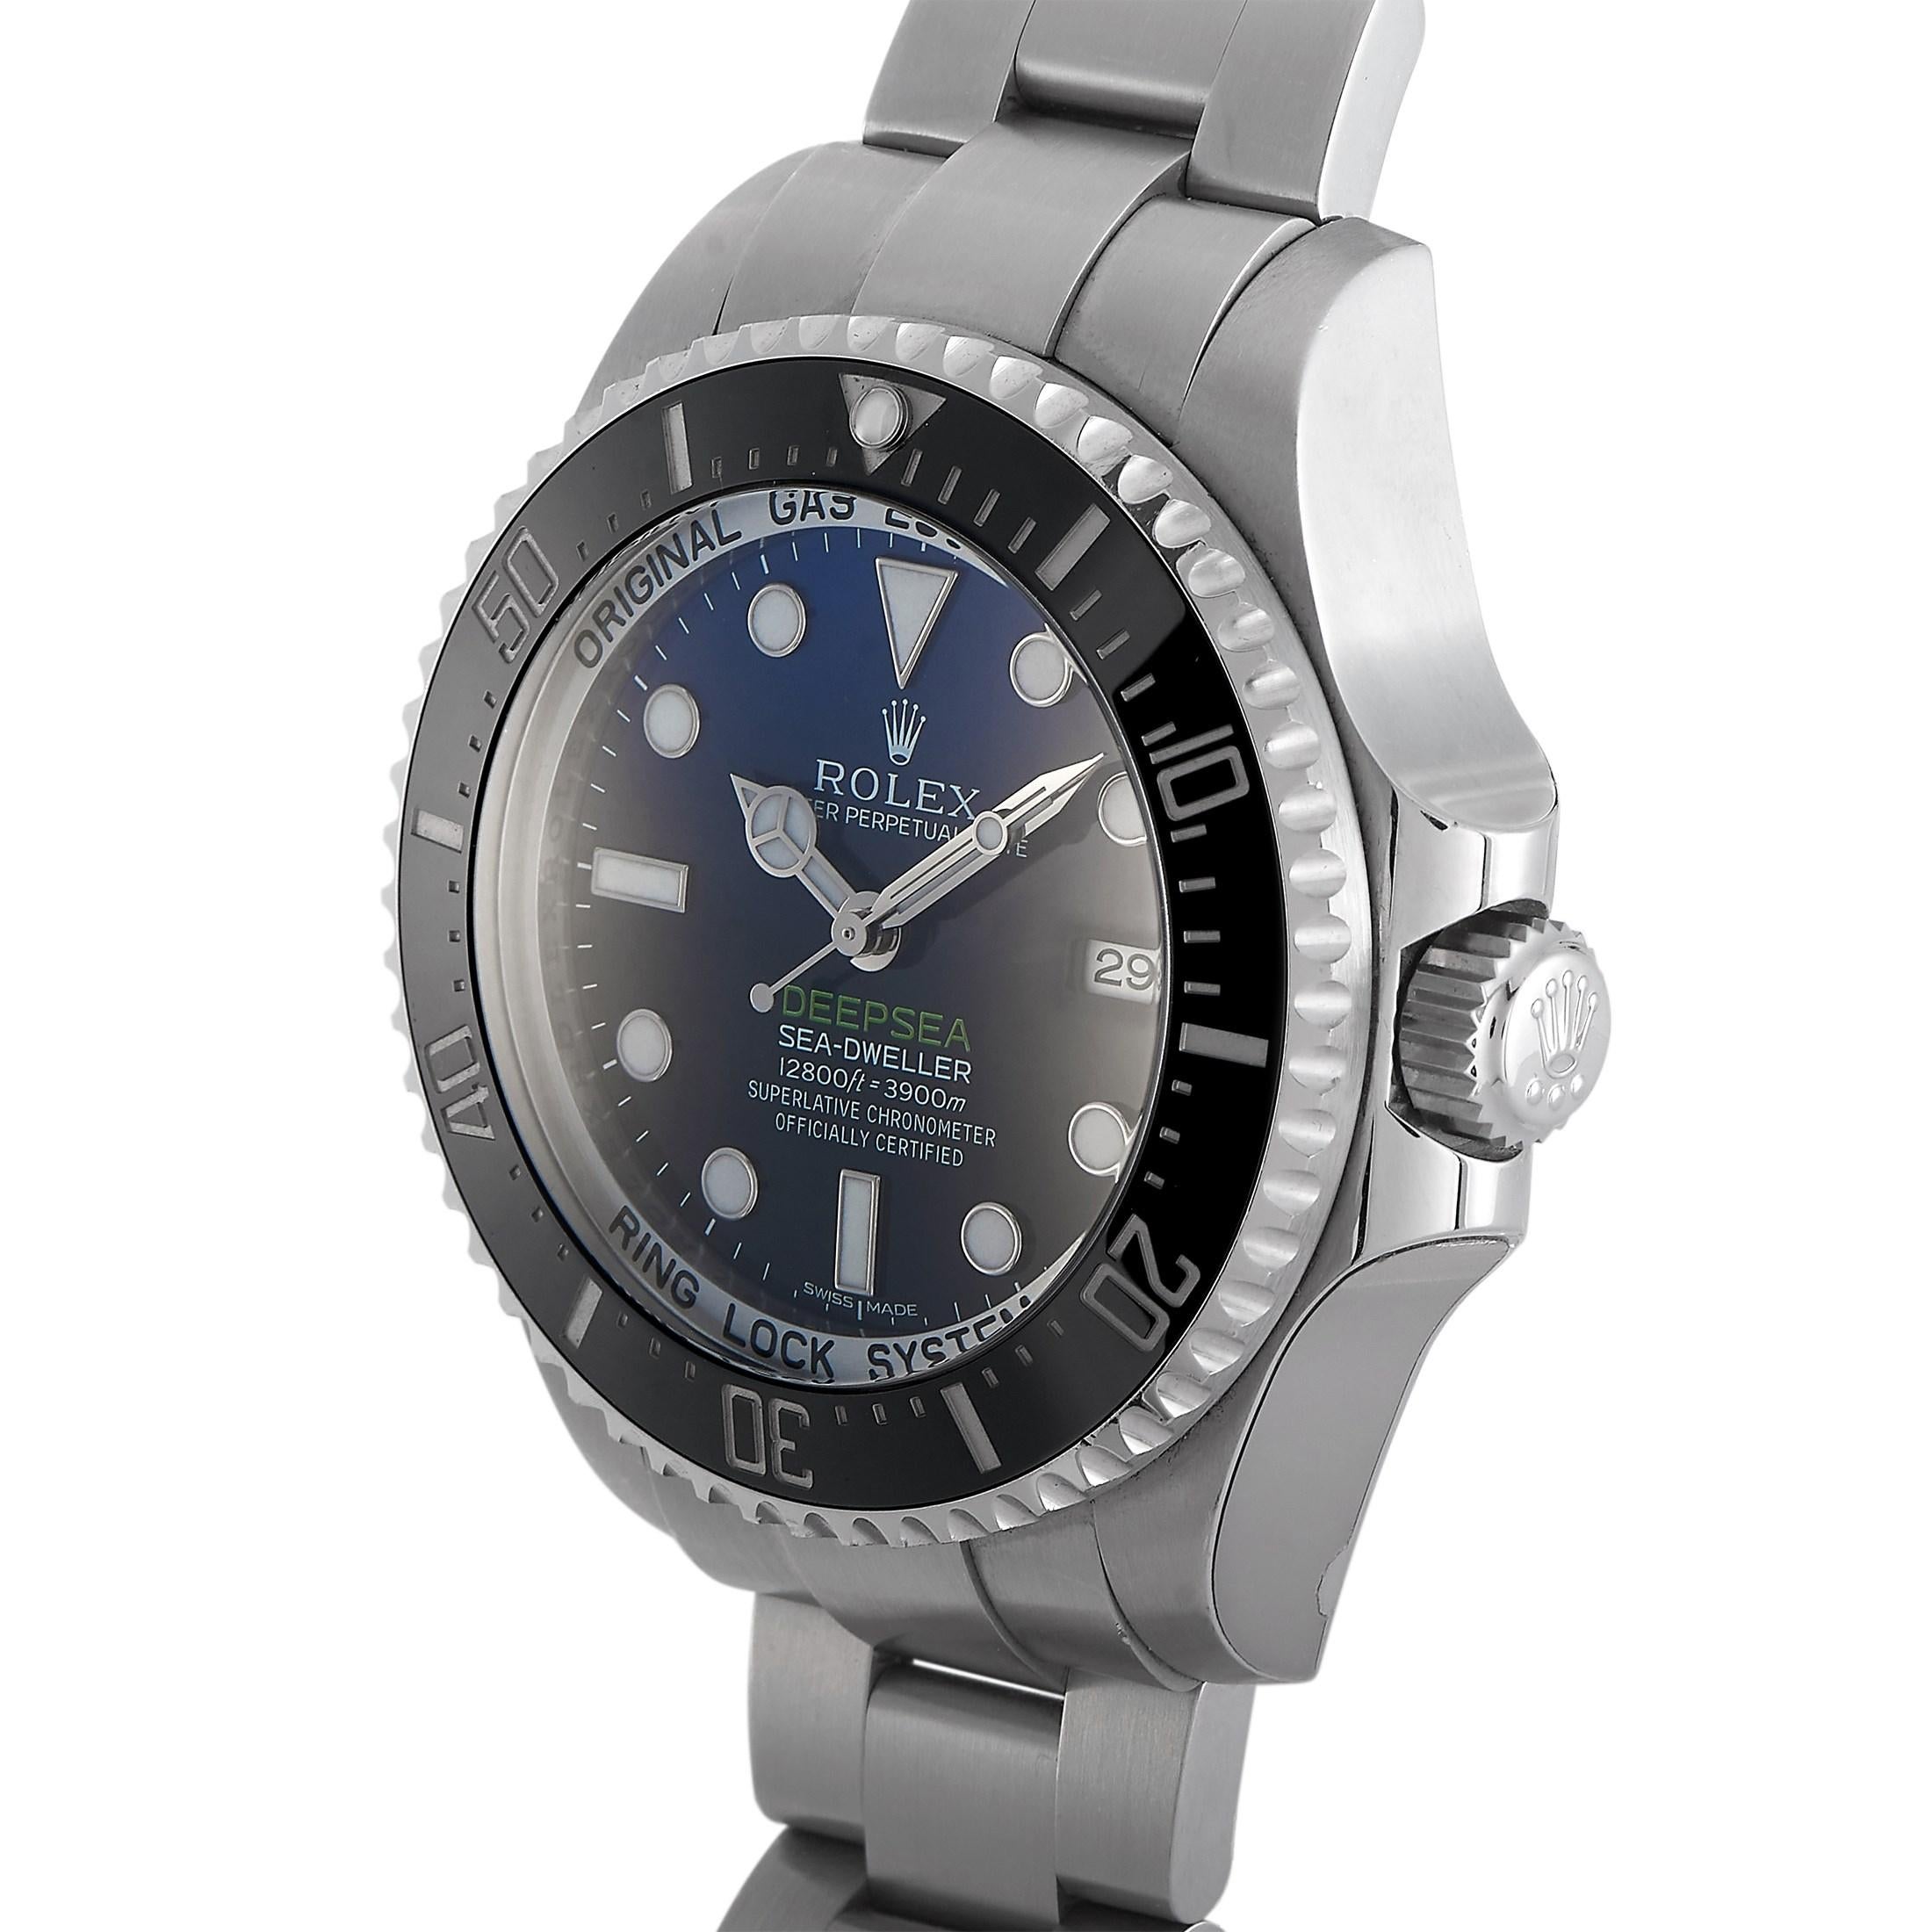 The Rolex Sea-Dweller Deepsea Watch, reference number 116660, is a luxury timepiece that will continually command attention.

The perfect addition to any collection, this watch features a 44mm stainless steel case, a stainless steel bracelet, and a